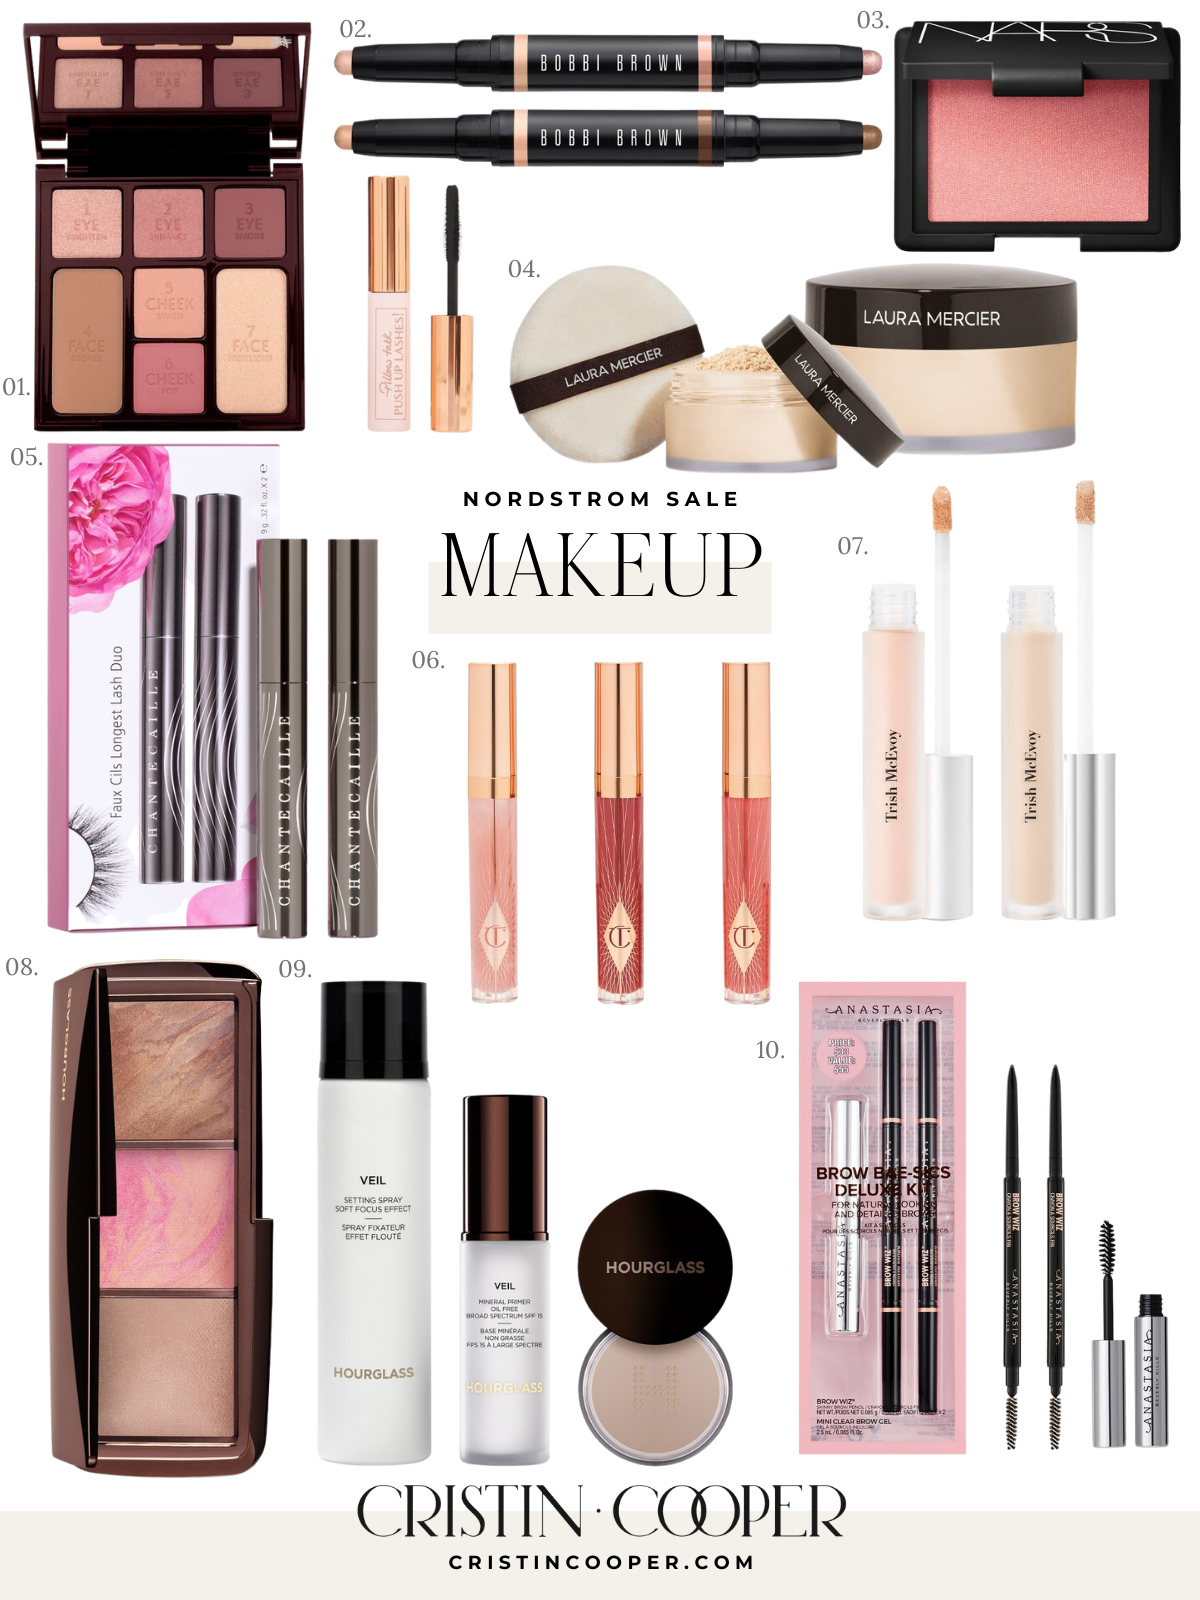 Makeup deals during the Nordstrom Anniversary Sale. 